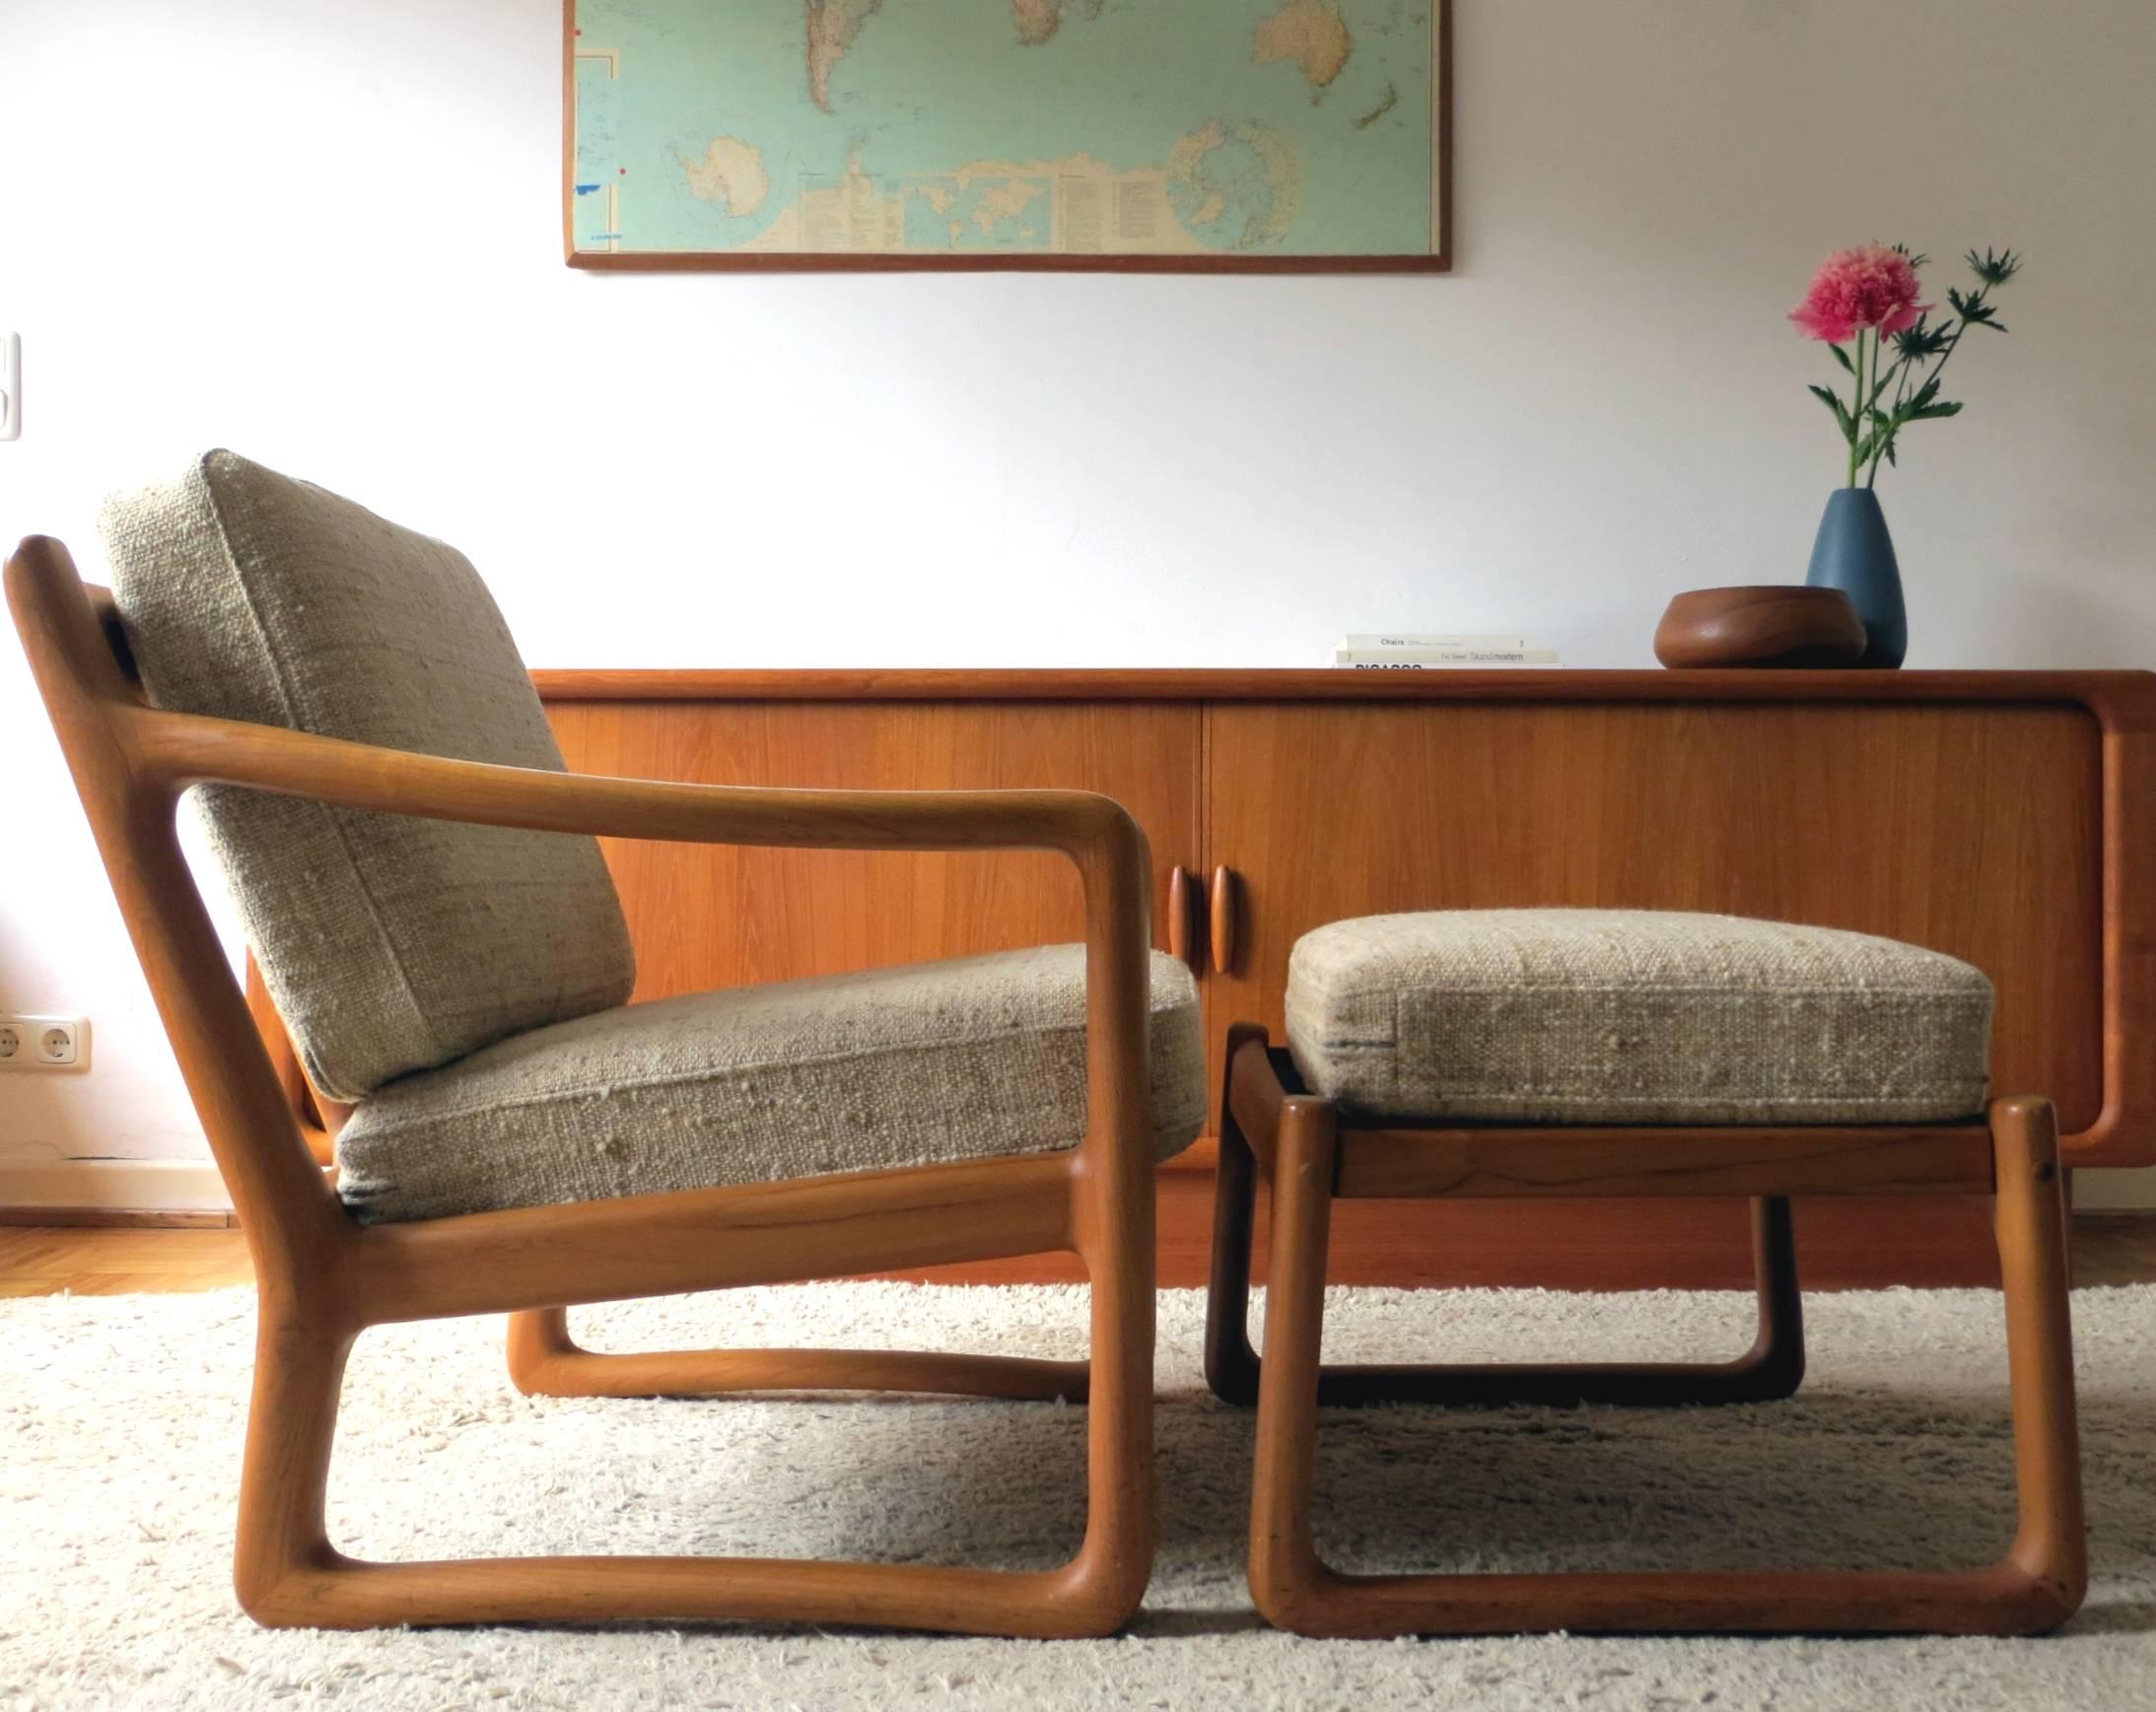 This offer included two thick upholstery lounge / club chairs with two upholstery stools or ottomans.

Two very comfortable, classical Danish Scandinavian Mid-Century Modern armchairs , produced by Juul Kristensen / JK Mobler Denmark / also Hans